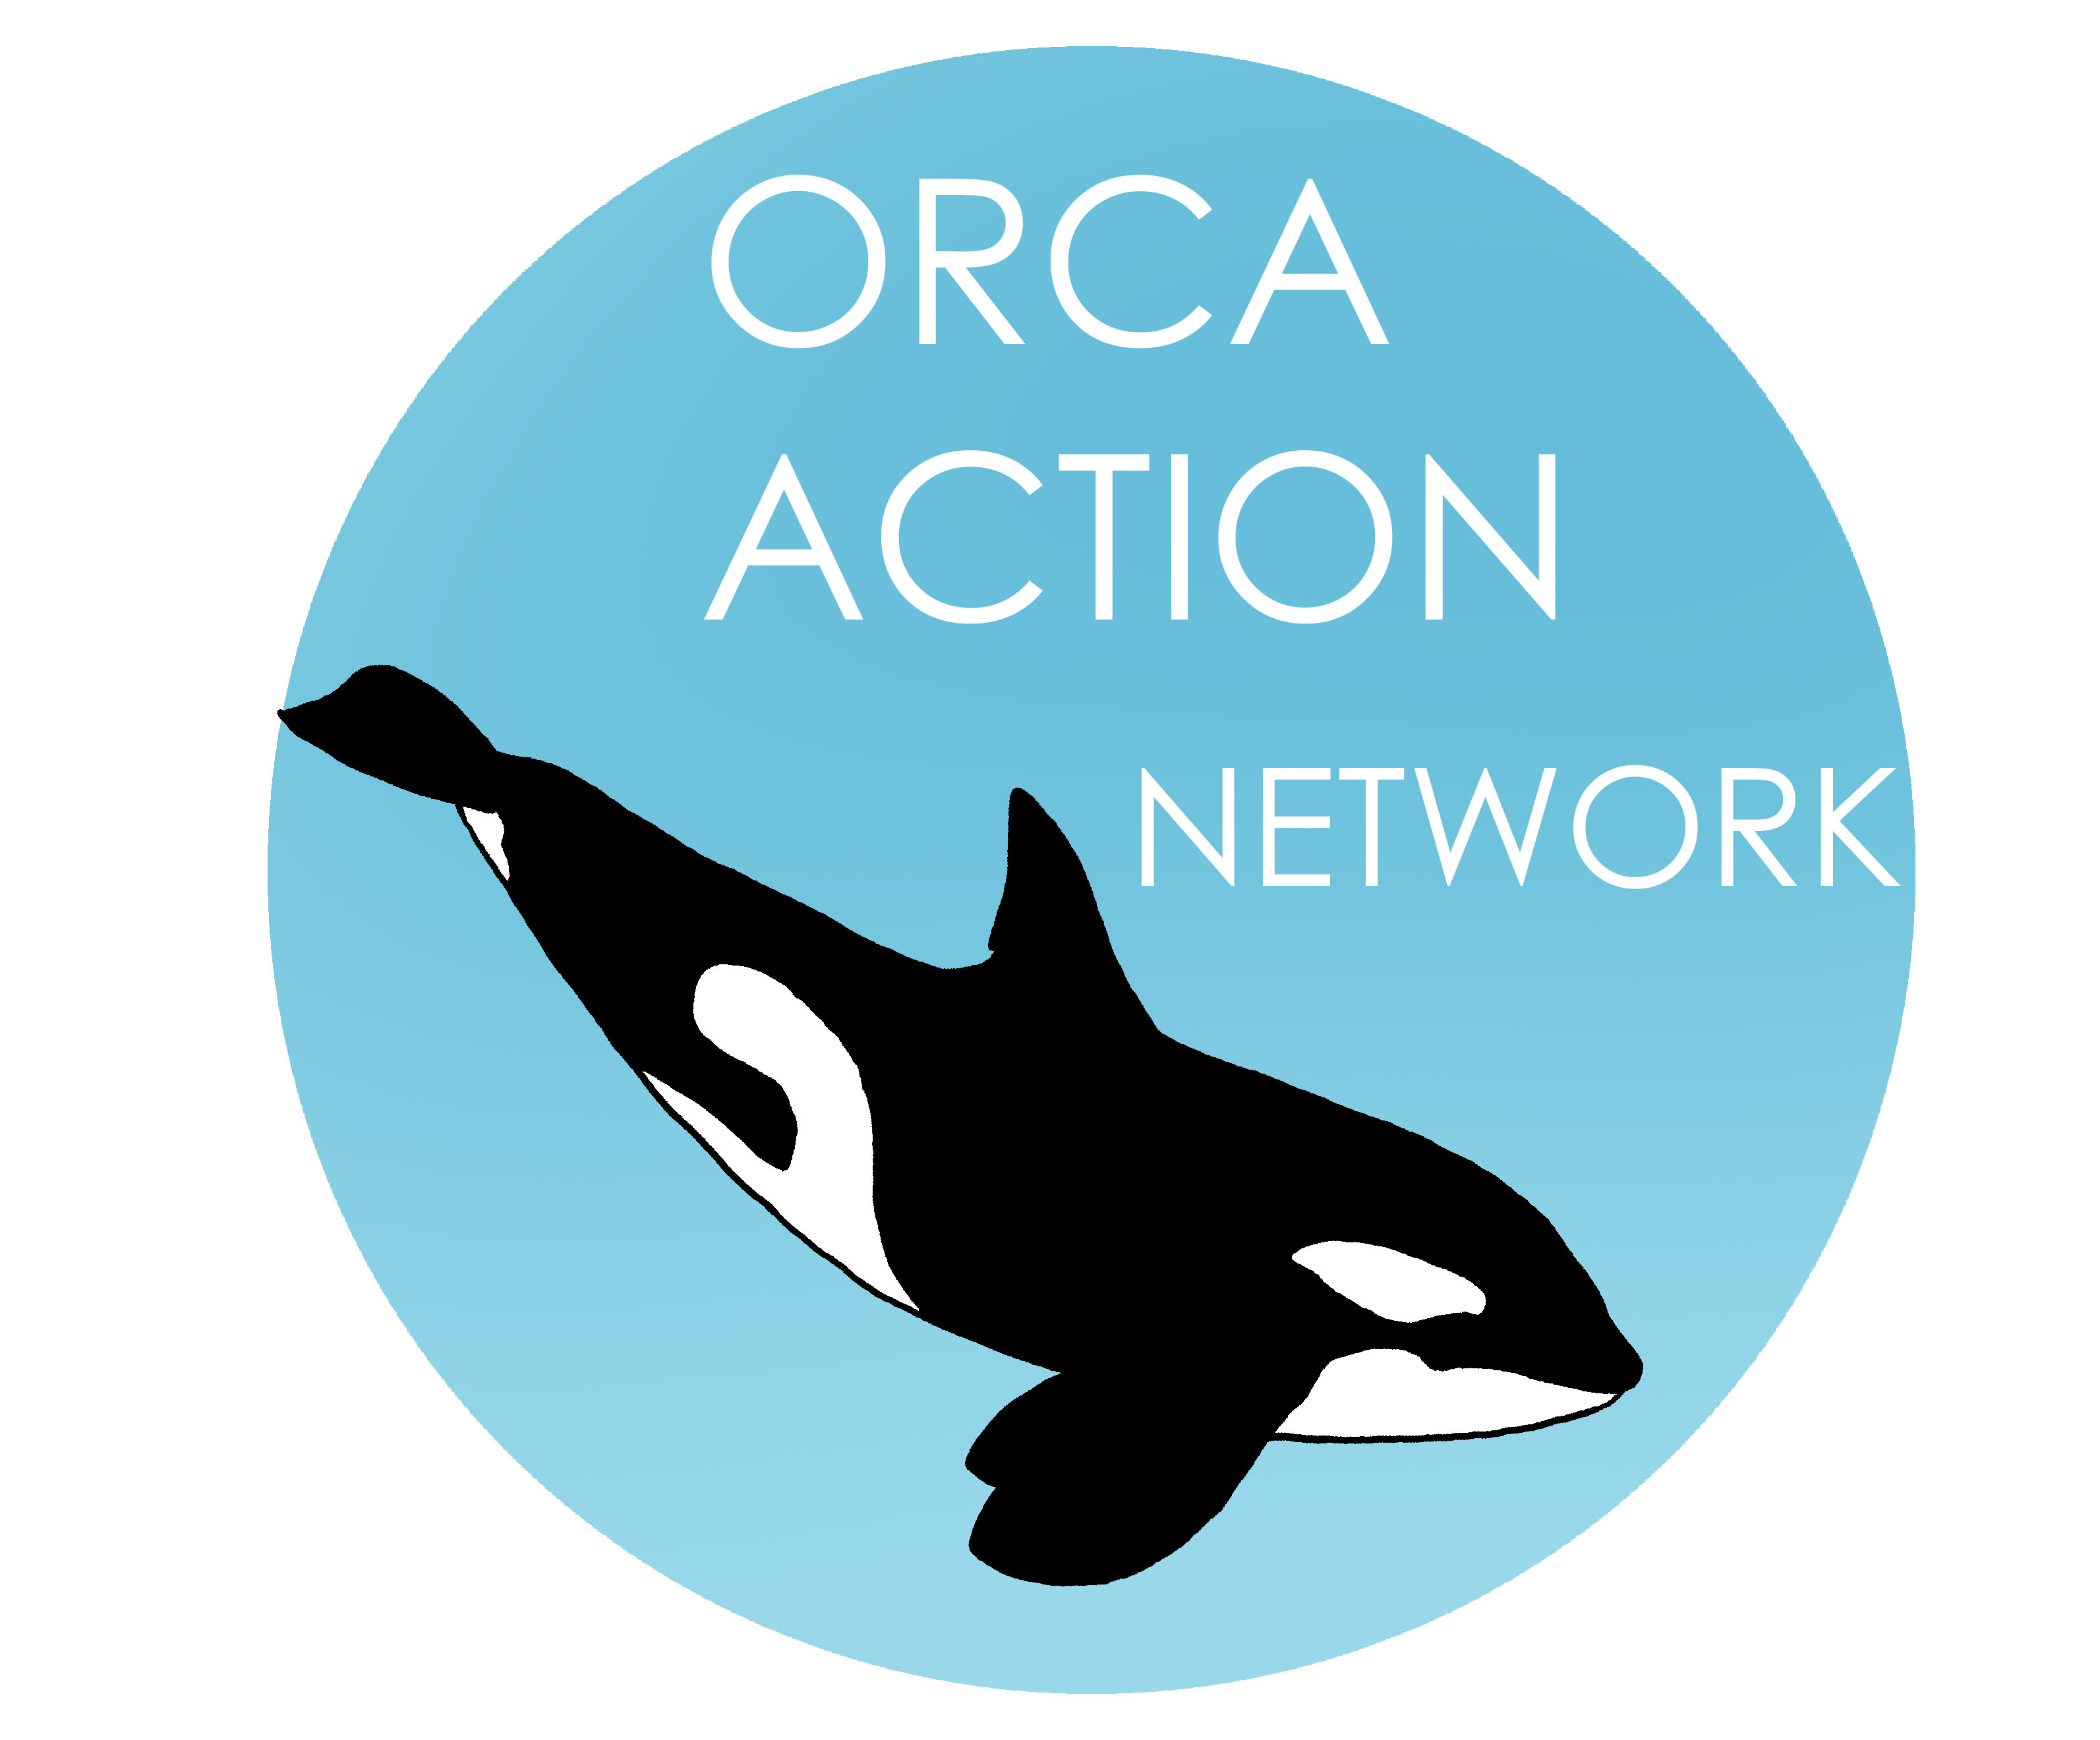 Orca Action Network